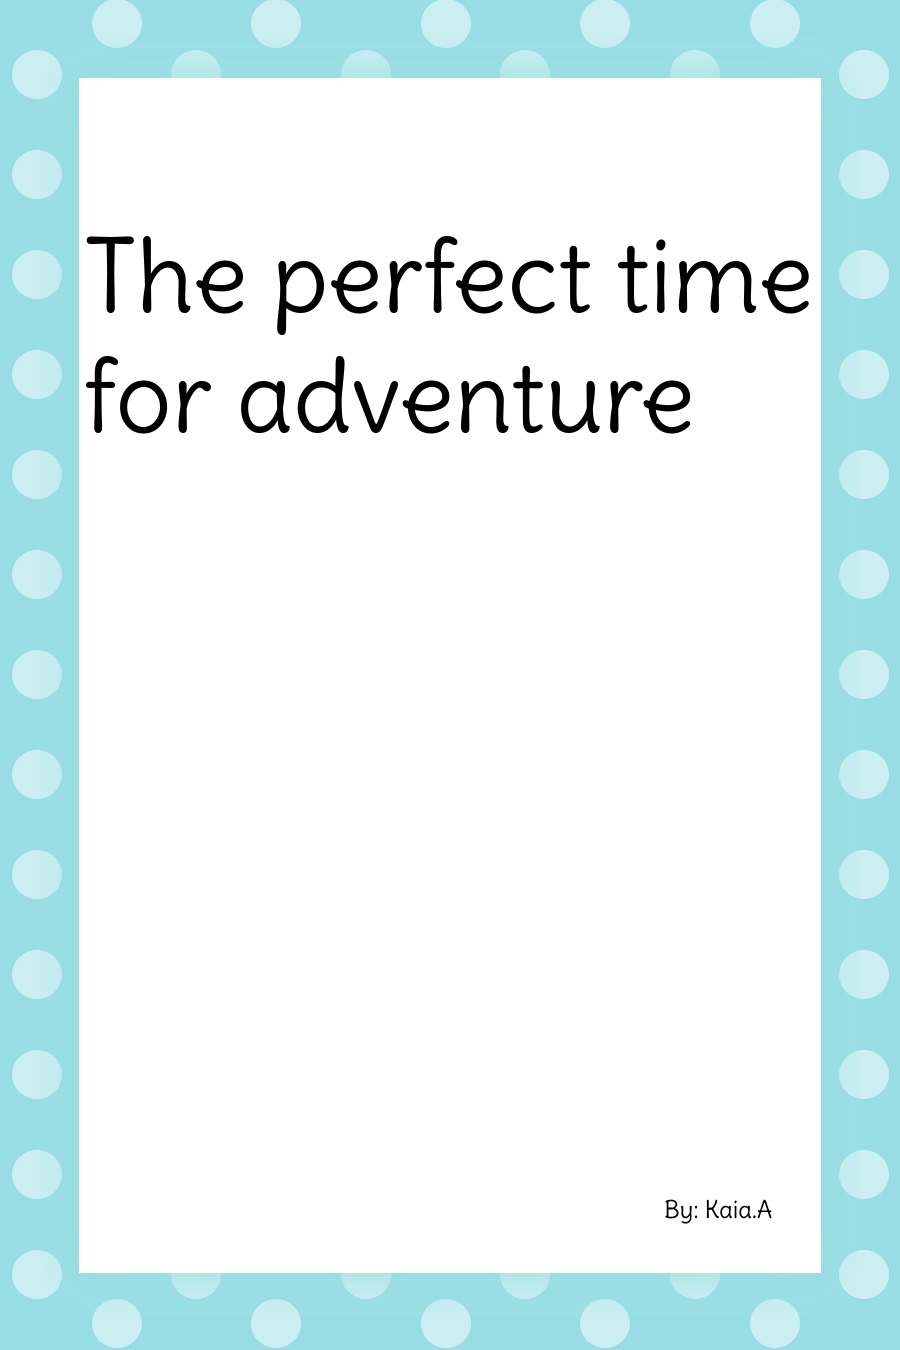 The Perfect Tine for Adventure by Kaia A